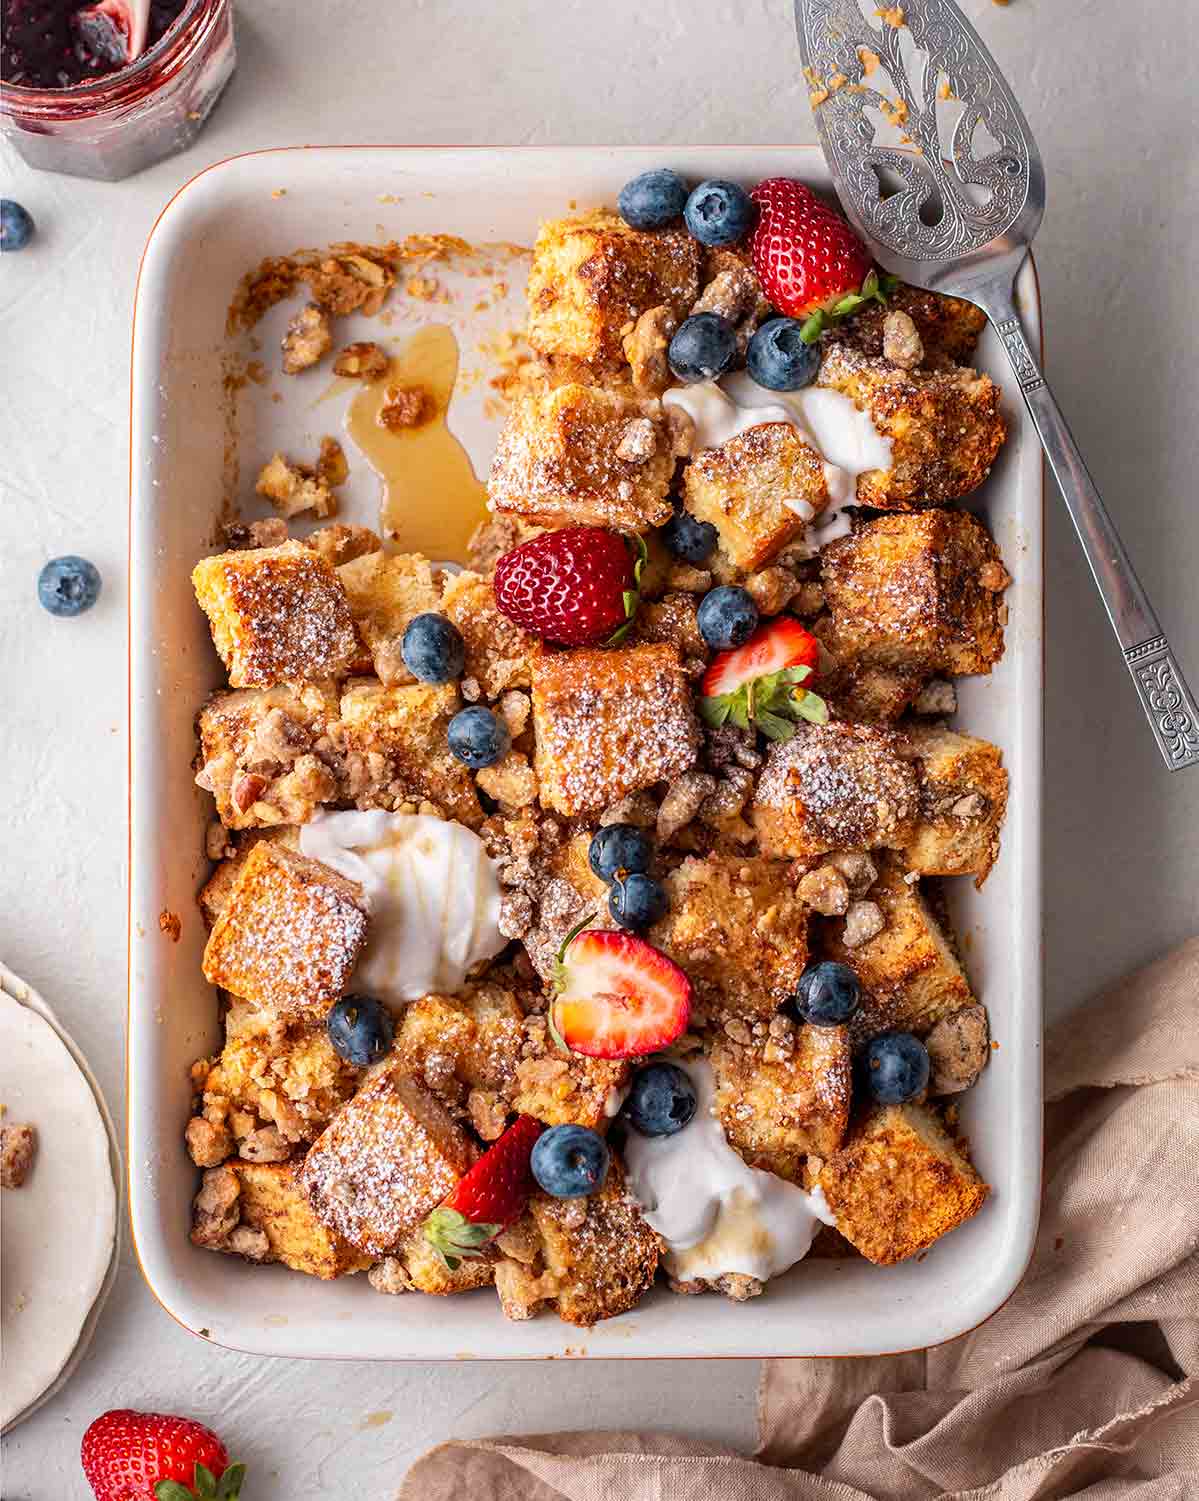 French toast casserole with berries and whipped cream.